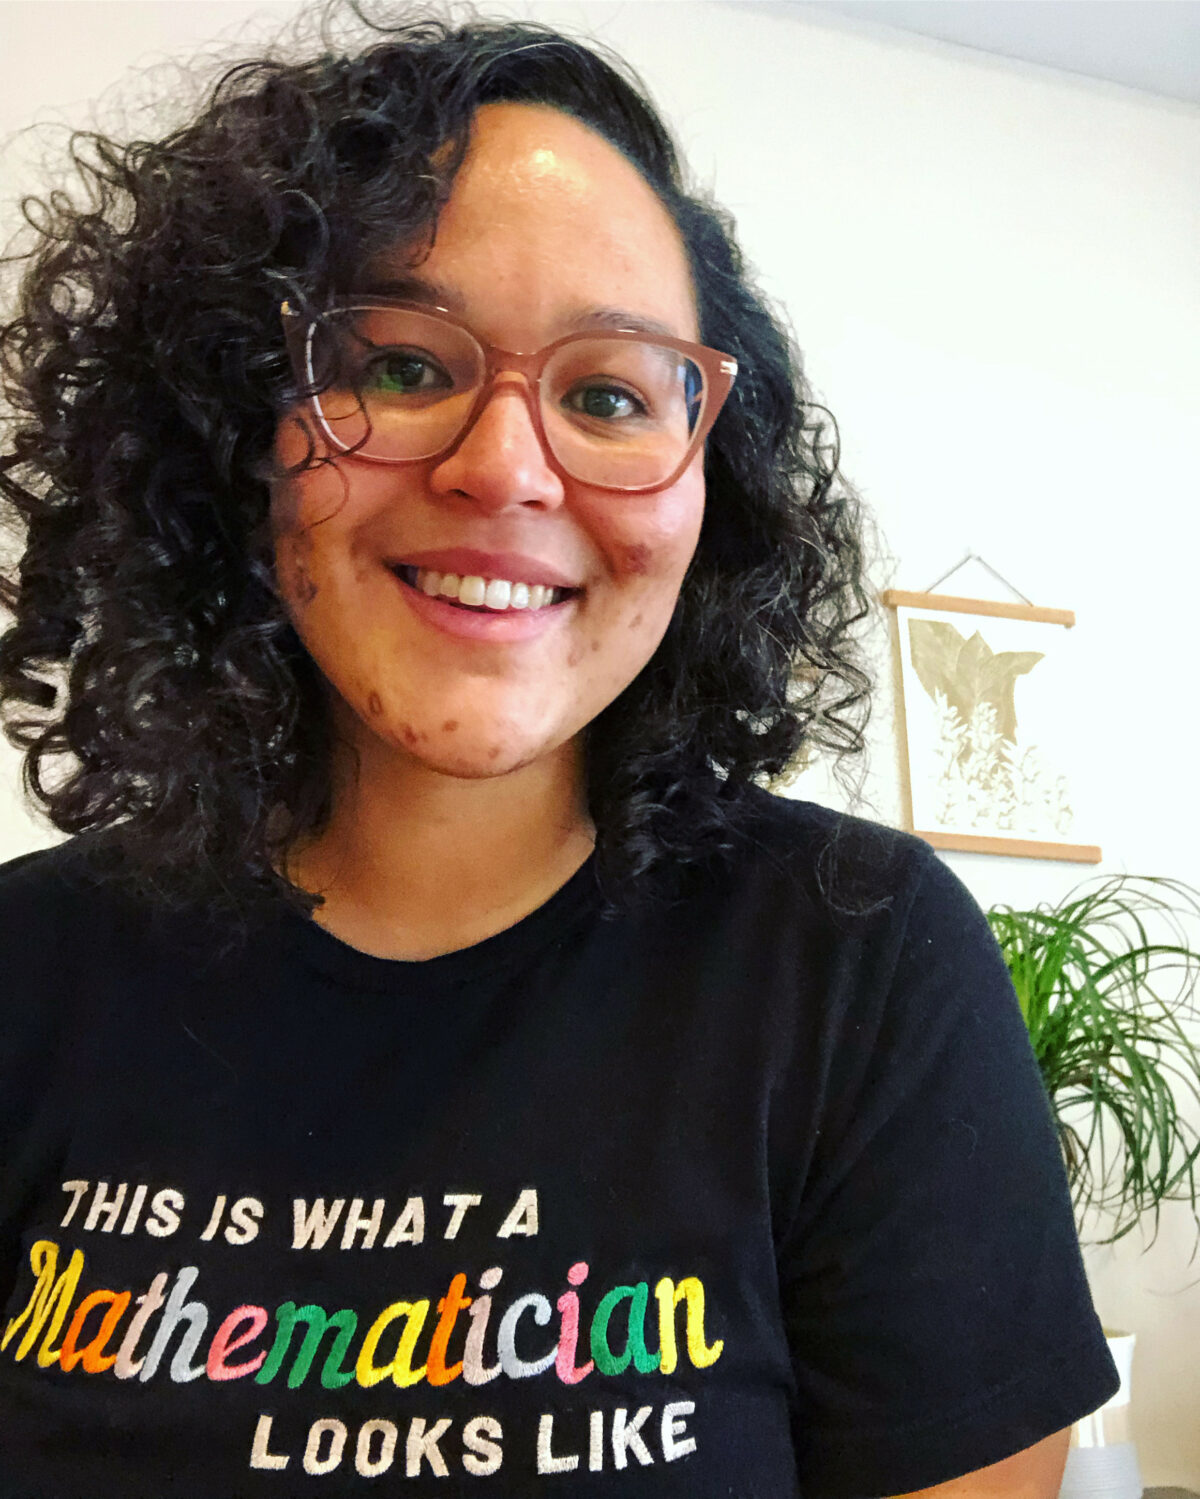 A Black woman wearing glasses and a black shirt with the words 